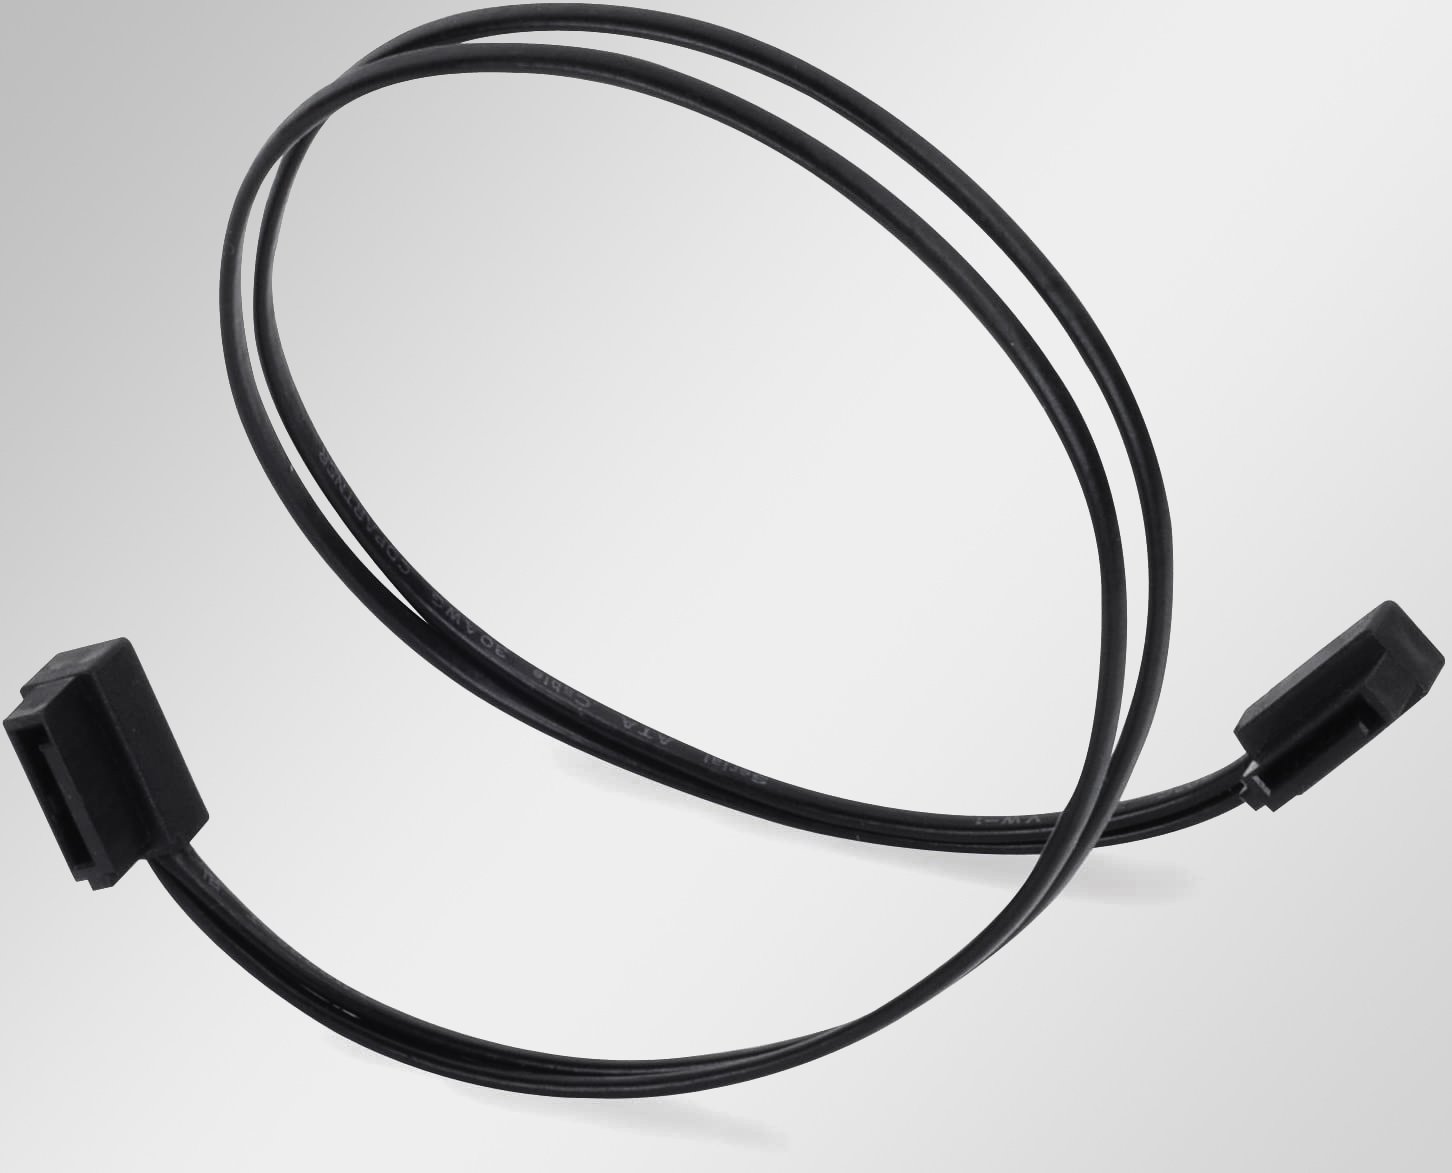 What Is SATA Cable And What Is It Used For? - ElectronicsHub